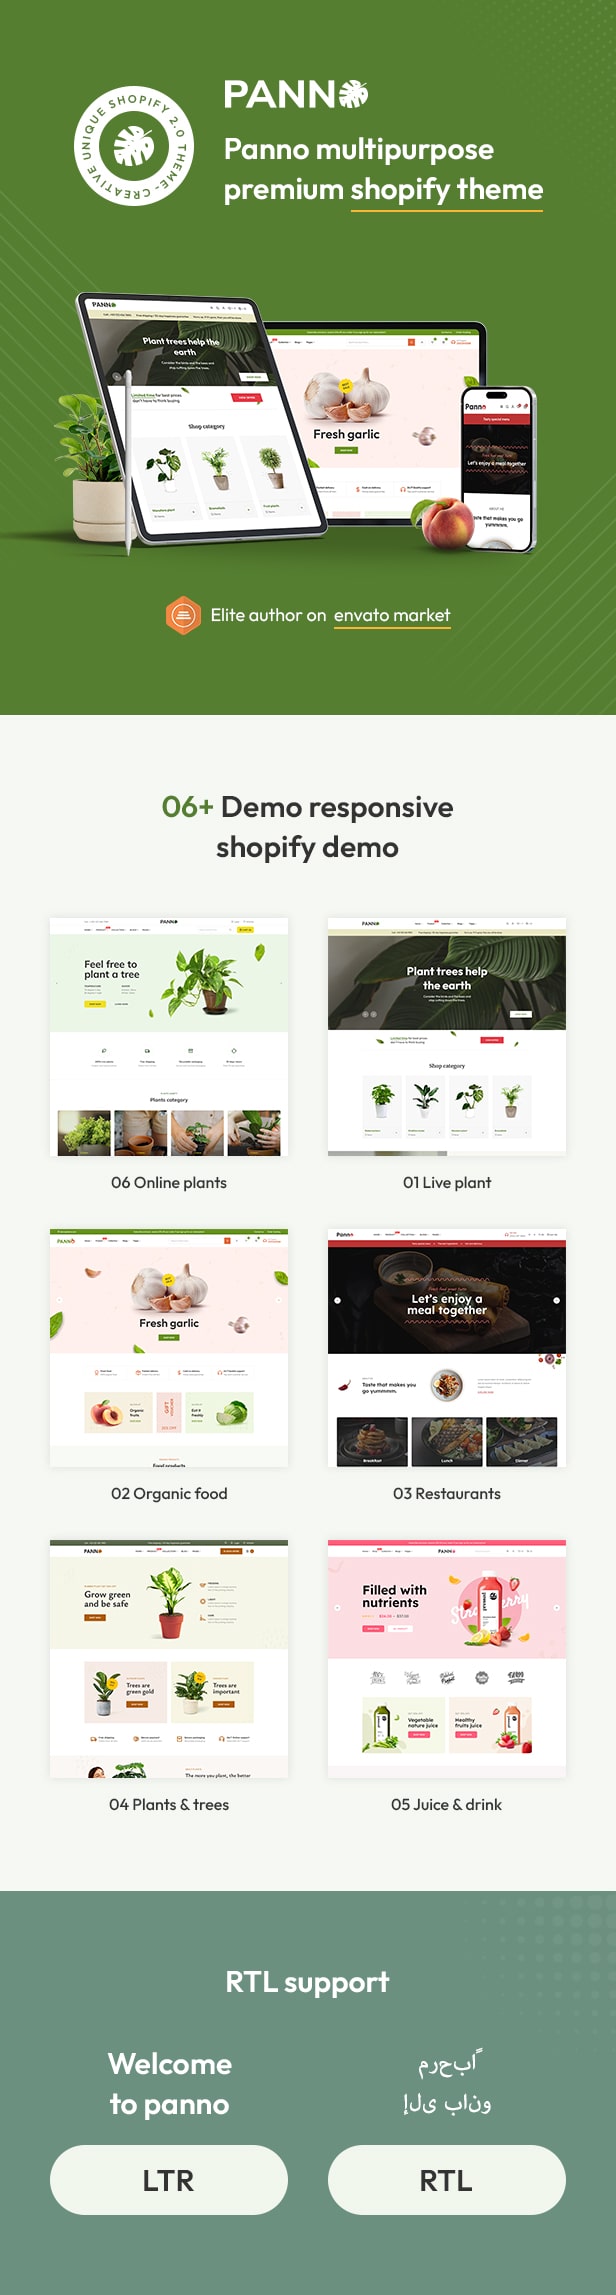 Panno - The Plants & Organic Food eCommerce Shopify Theme - 1